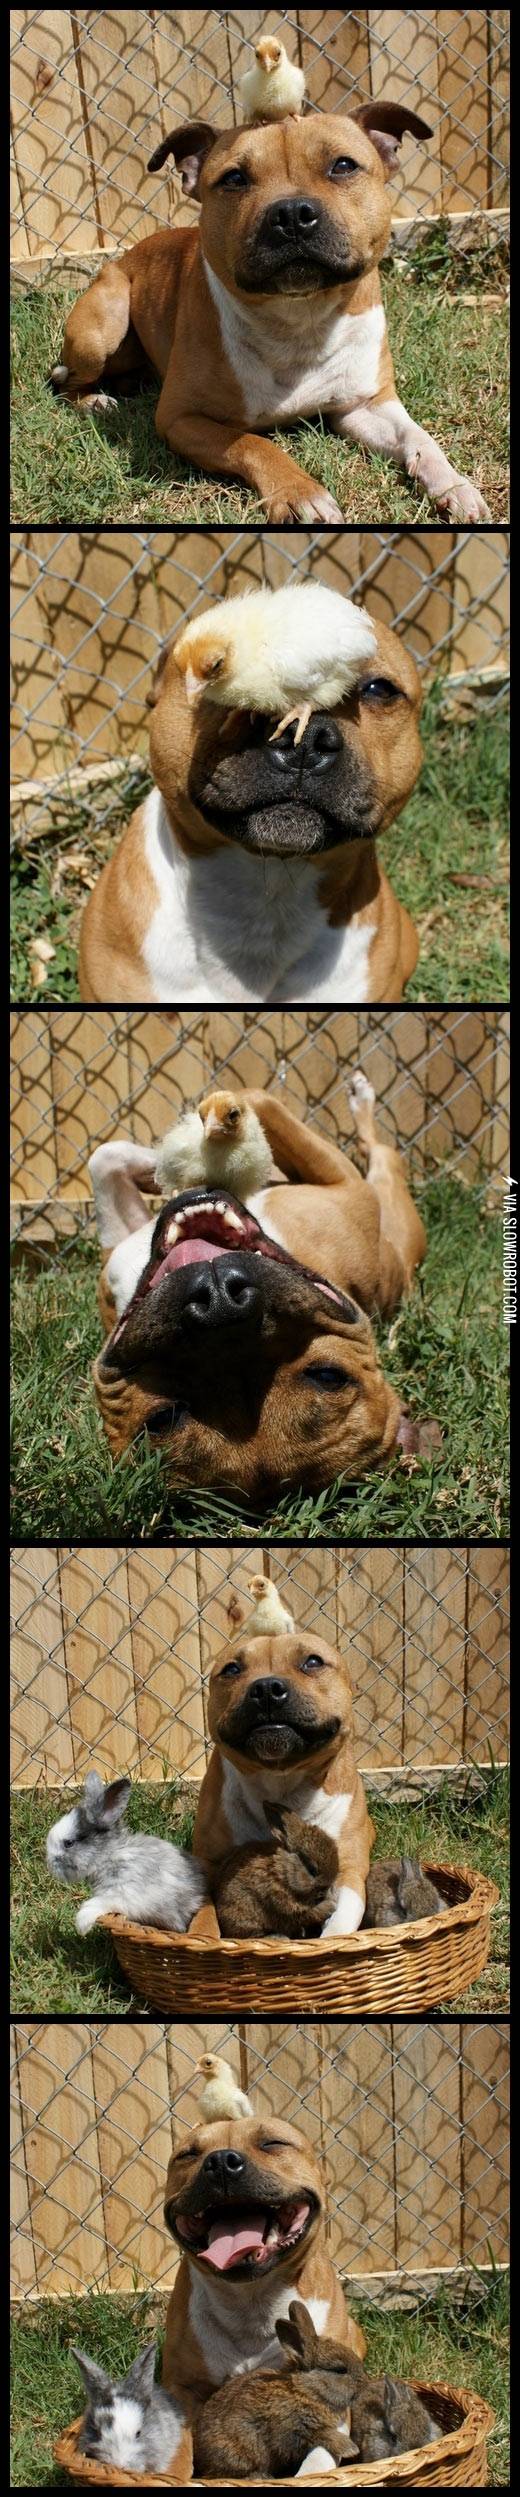 Pit+bulls+are+vicious.